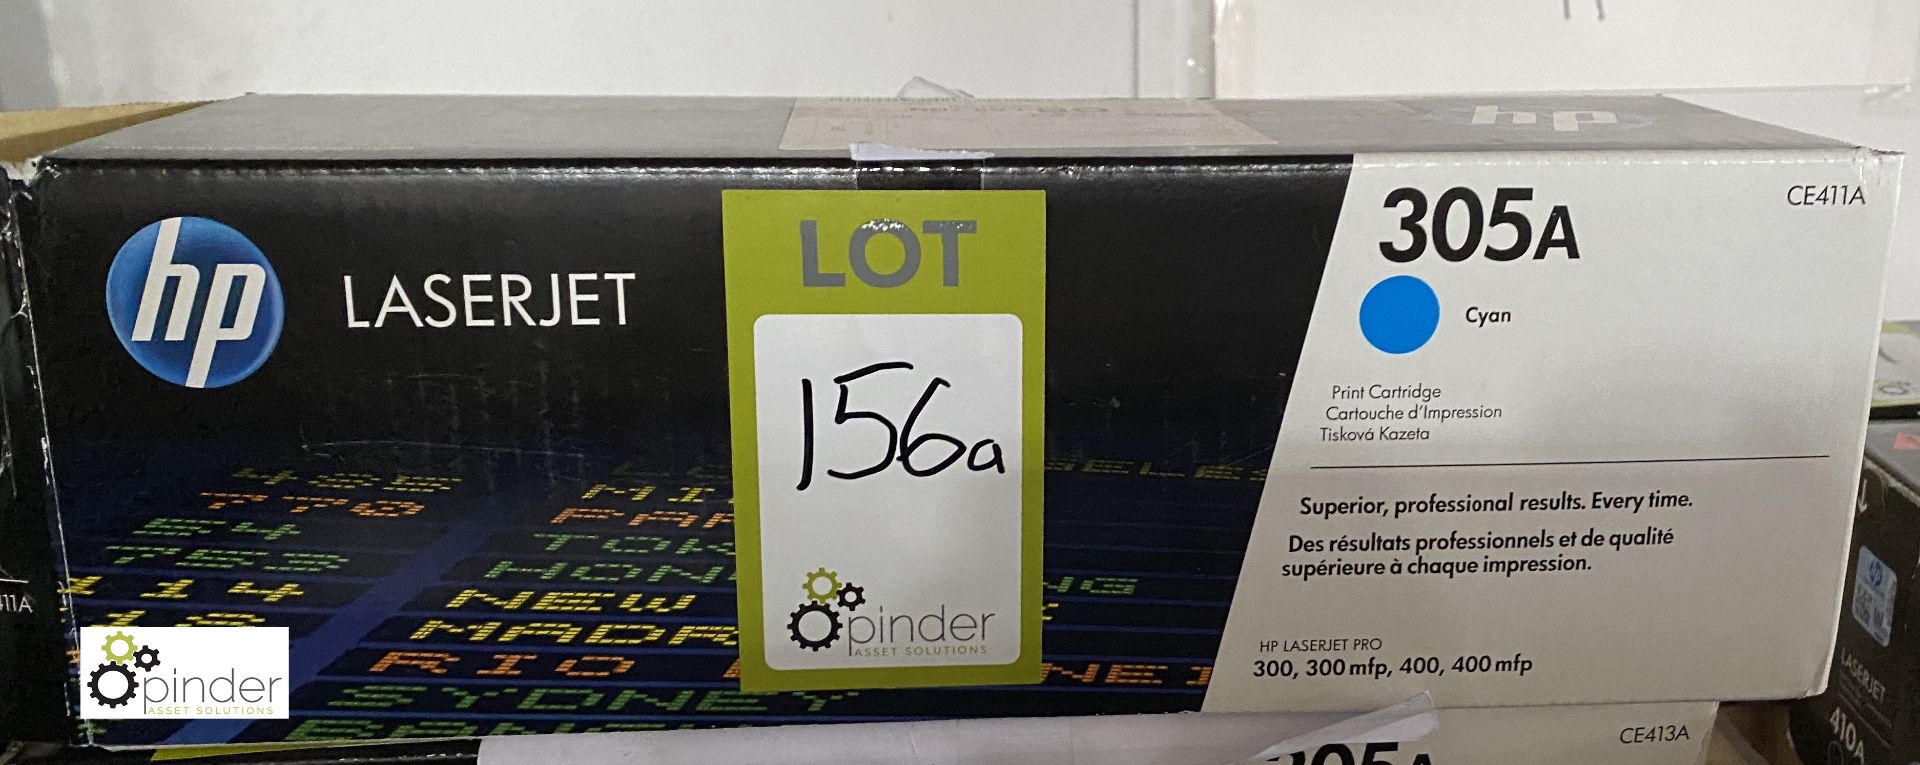 HP 305A Toner Cartridge, cyan, boxed and unused